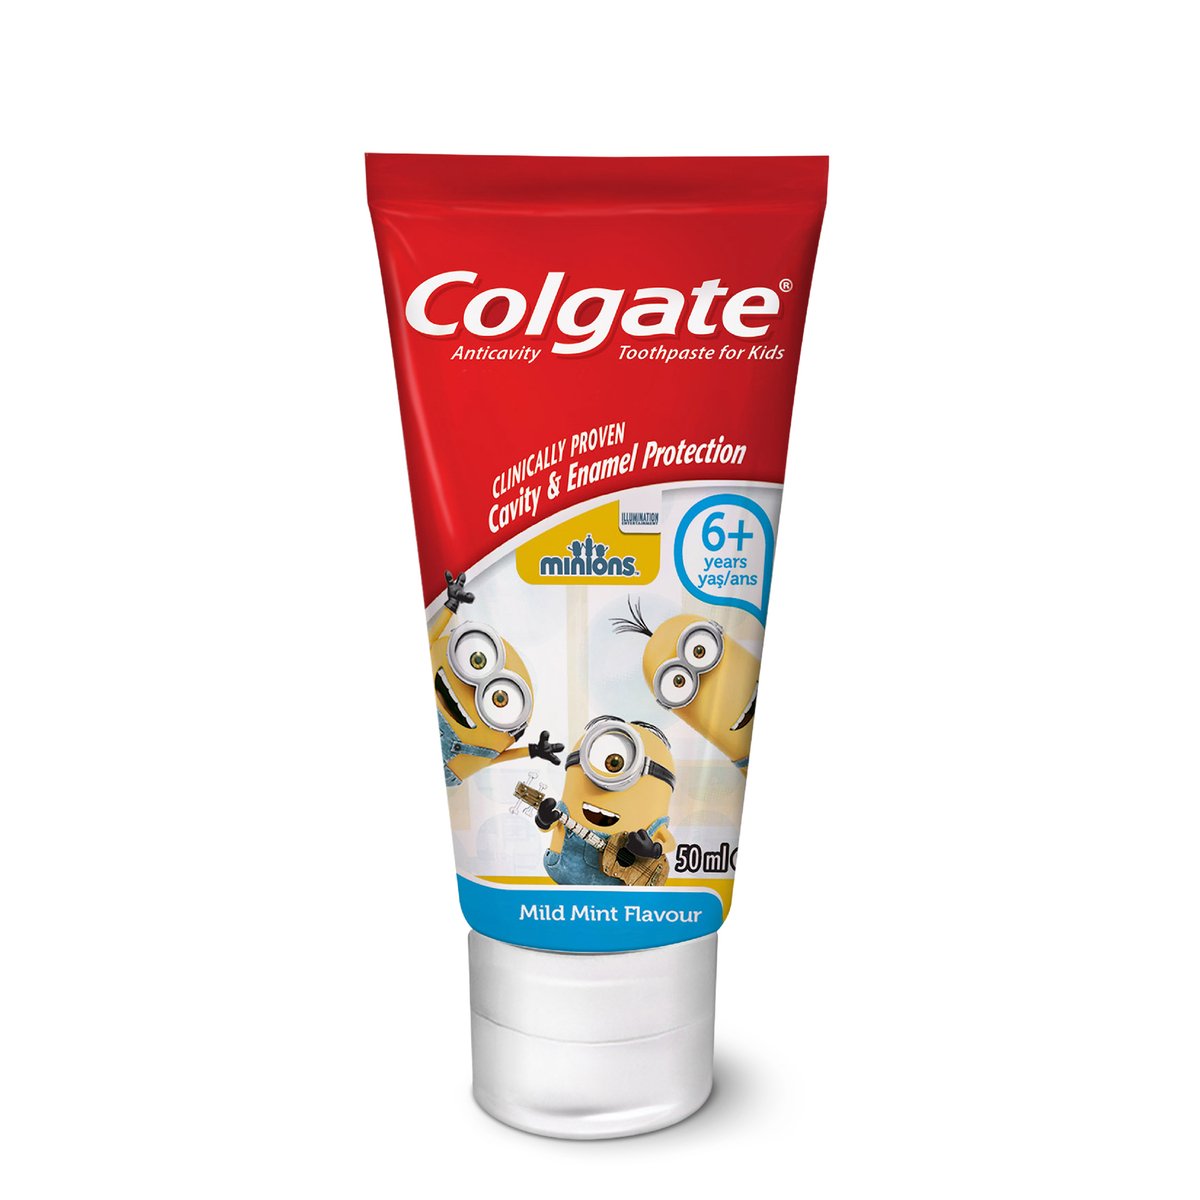 Colgate Toothpaste 6+ Years For Kids Minions 50ml